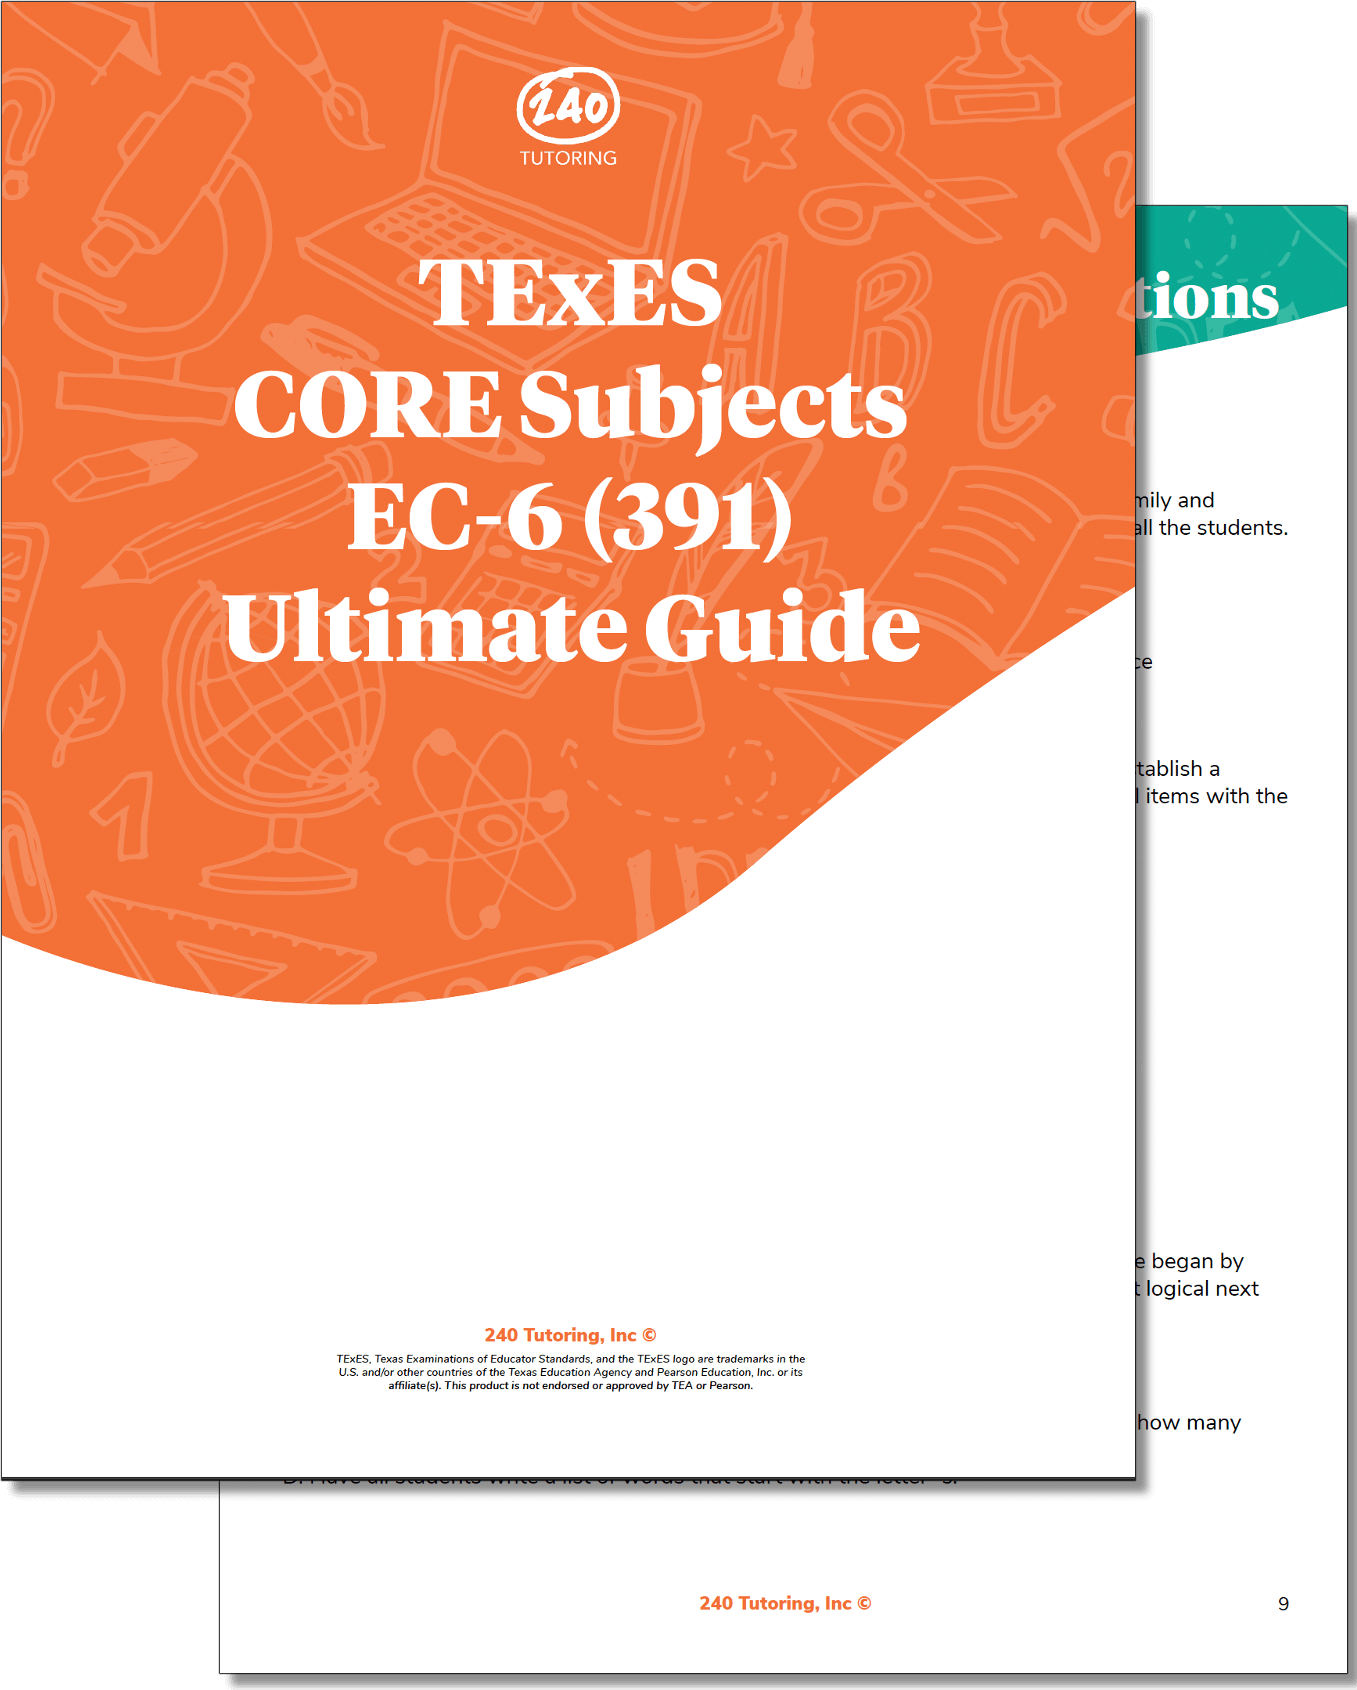 TExES Core Subjects EC-6 (391) Ultimate Guide